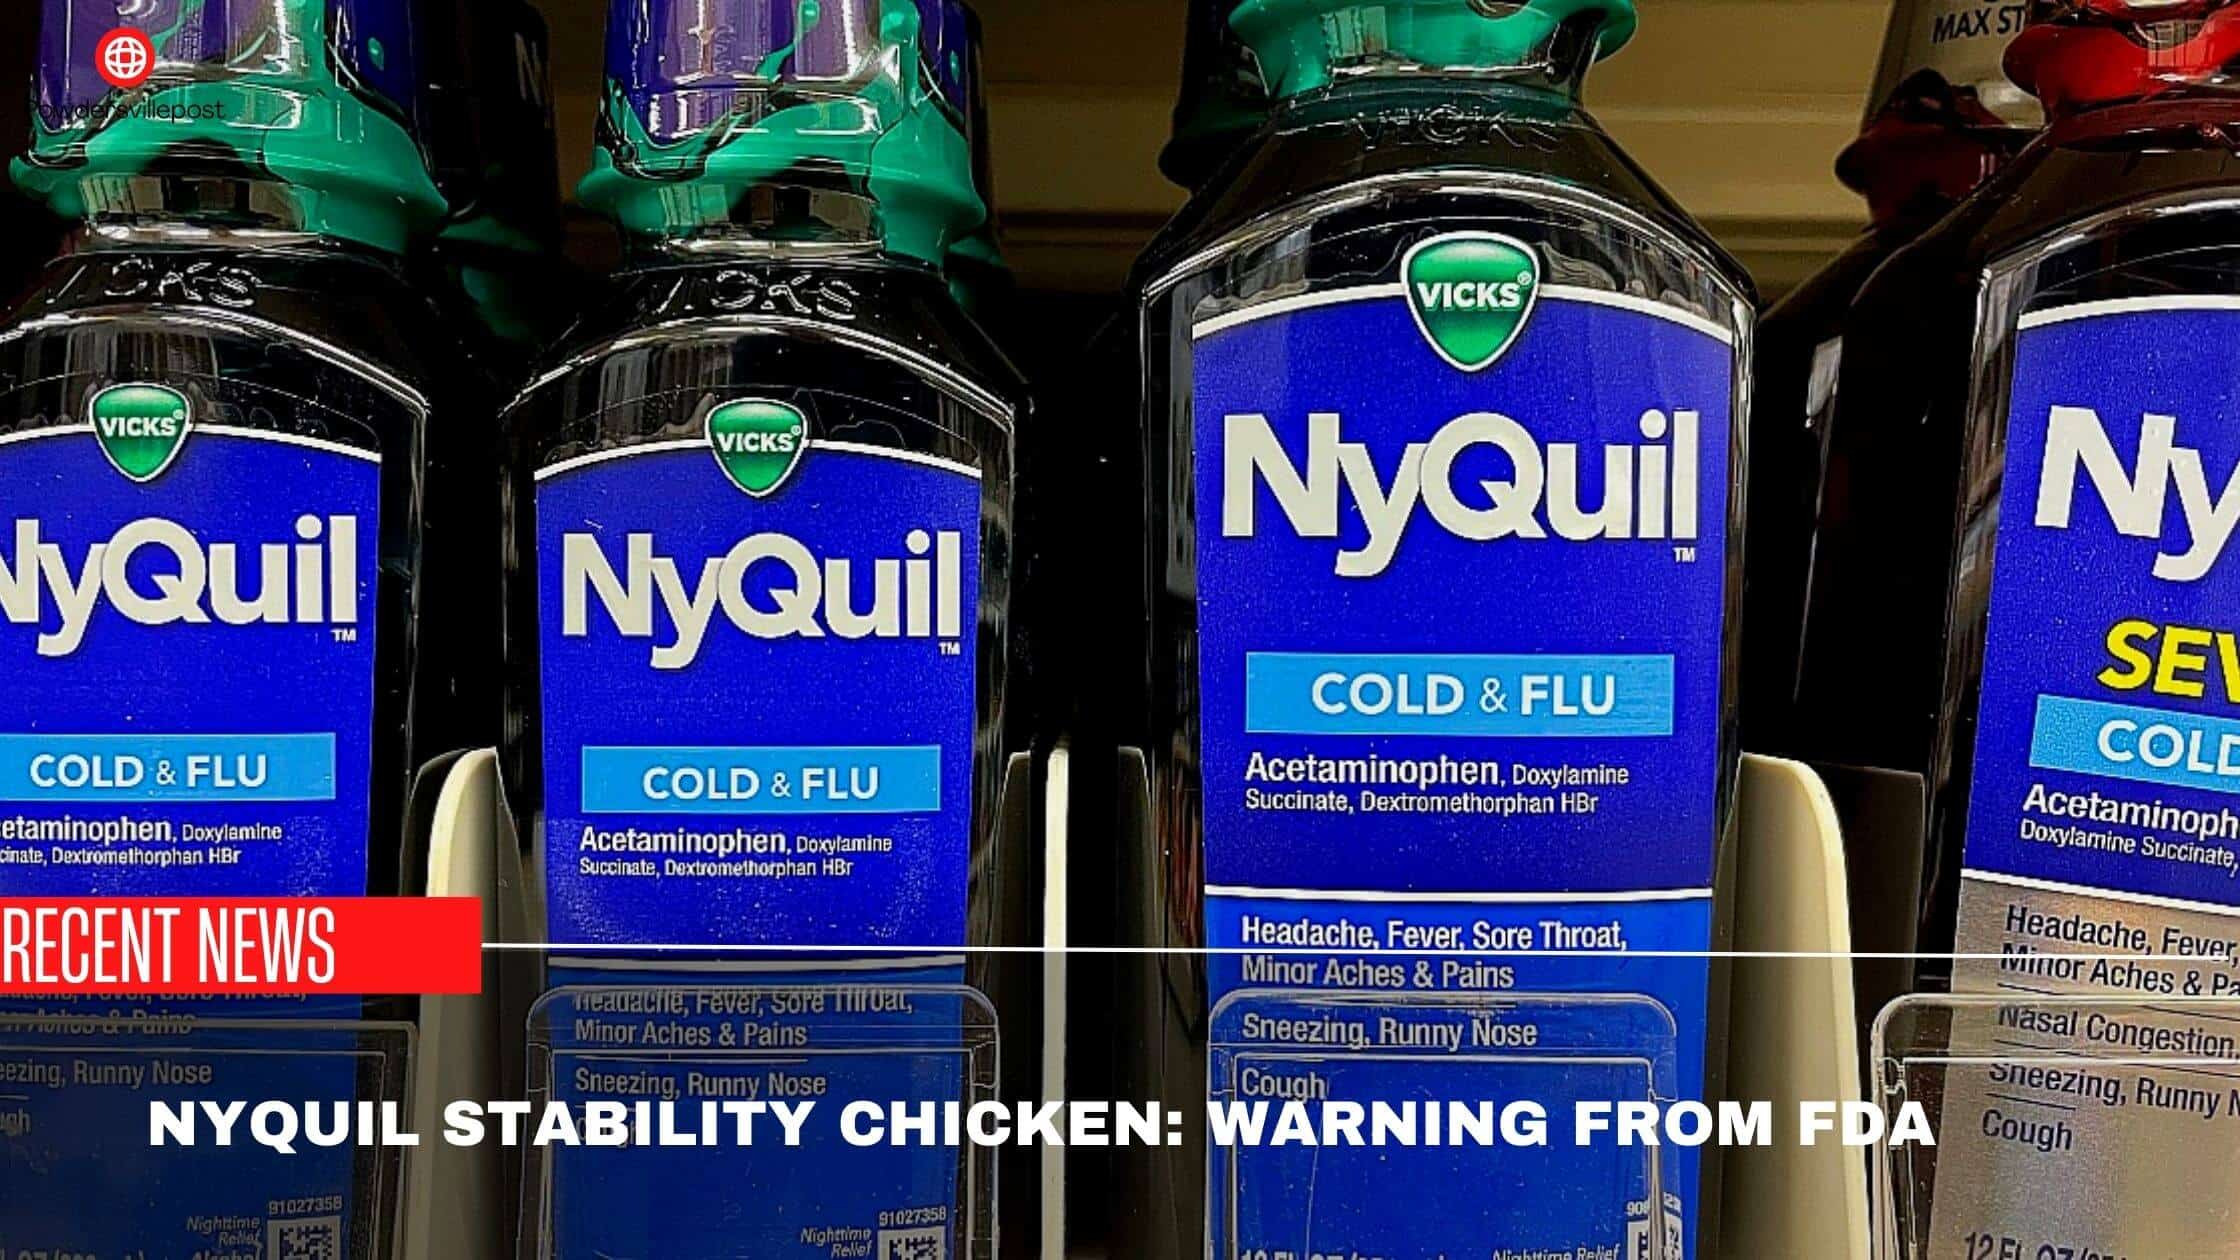 Nyquil Stability Chicken Warning From FDA